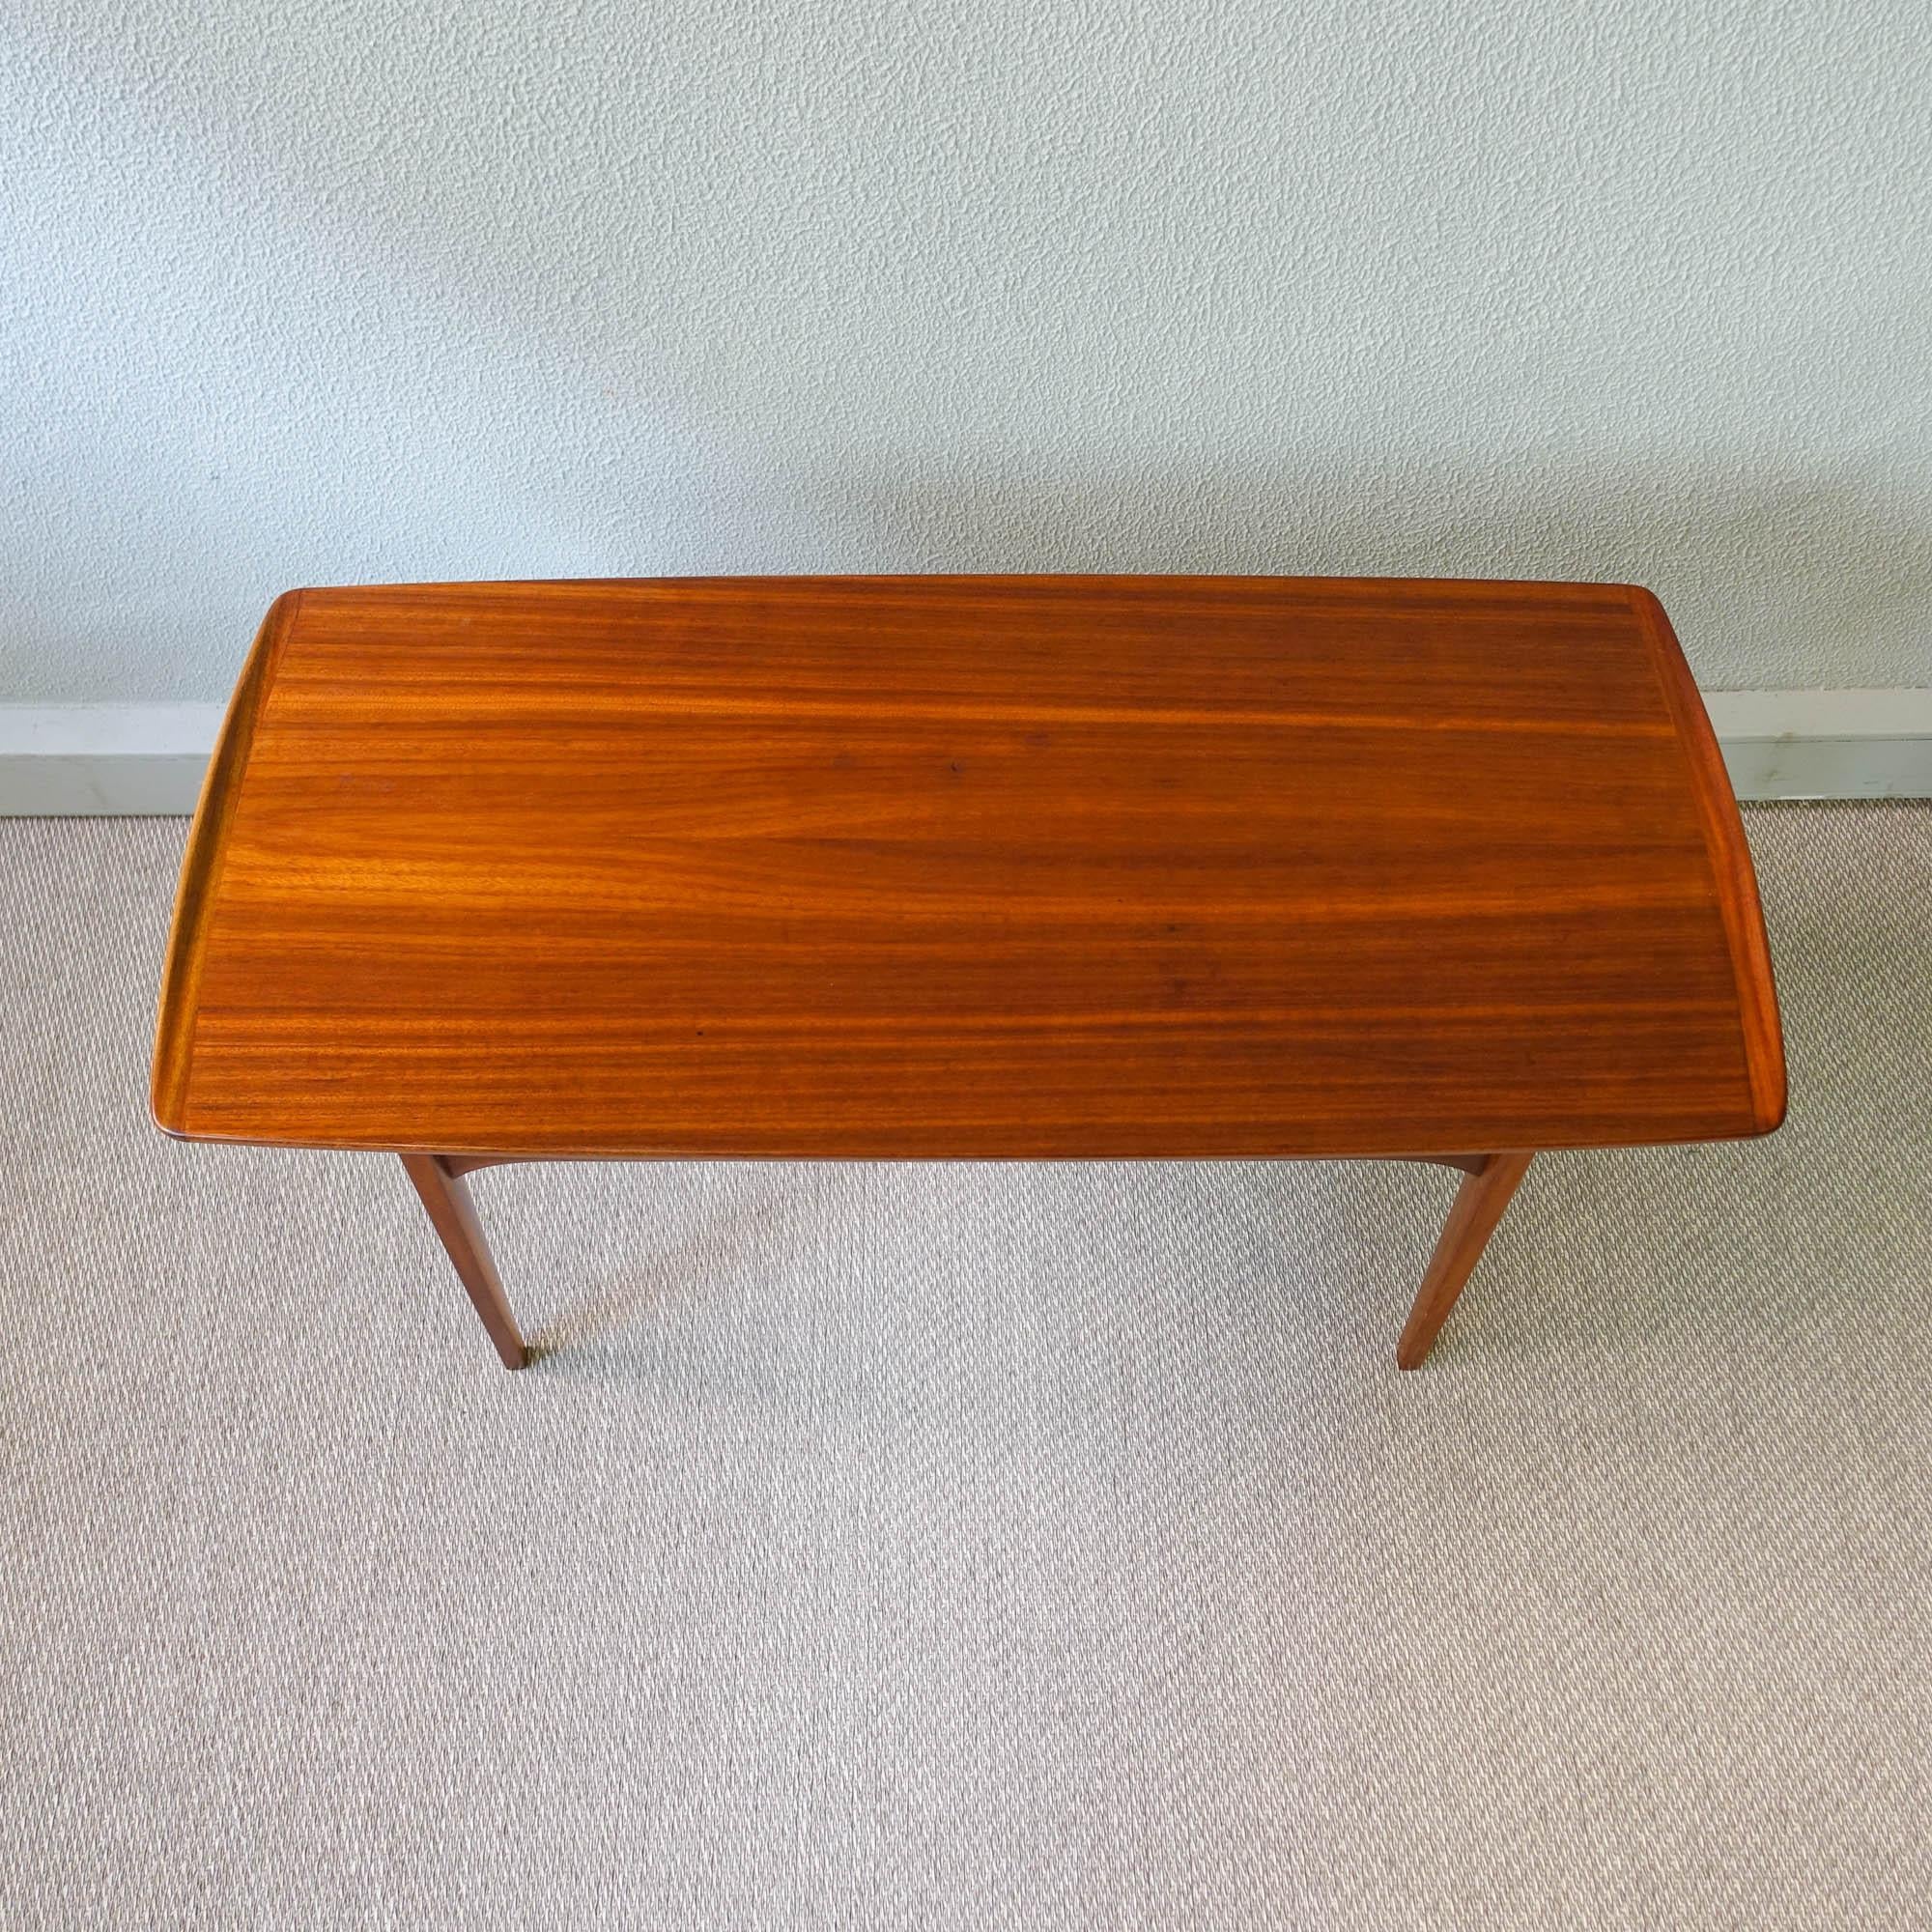 Mid-Century Modern Coffee Table, Model Excelsior, by José Espinho for Olaio, 1962 For Sale